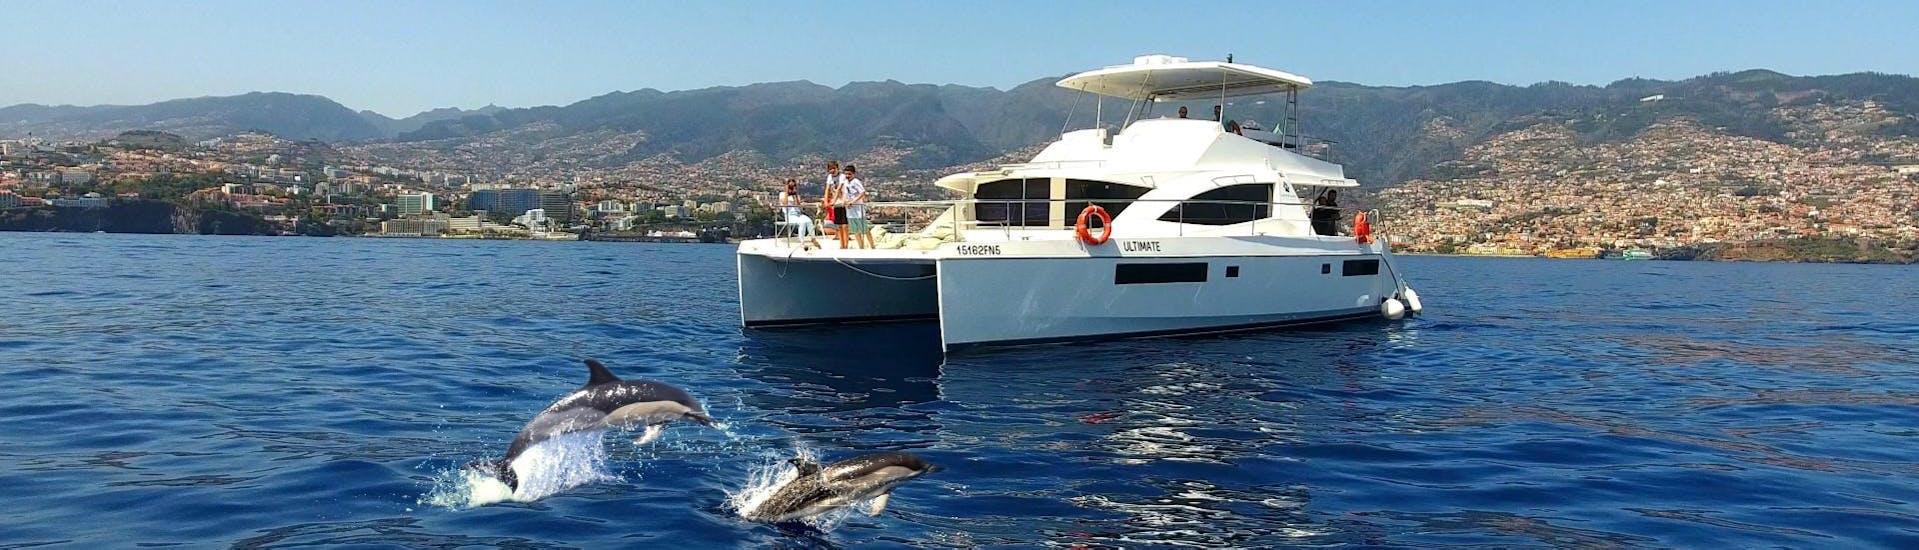 People watching dolphins from the boat of VIP Dolphins Madeira.